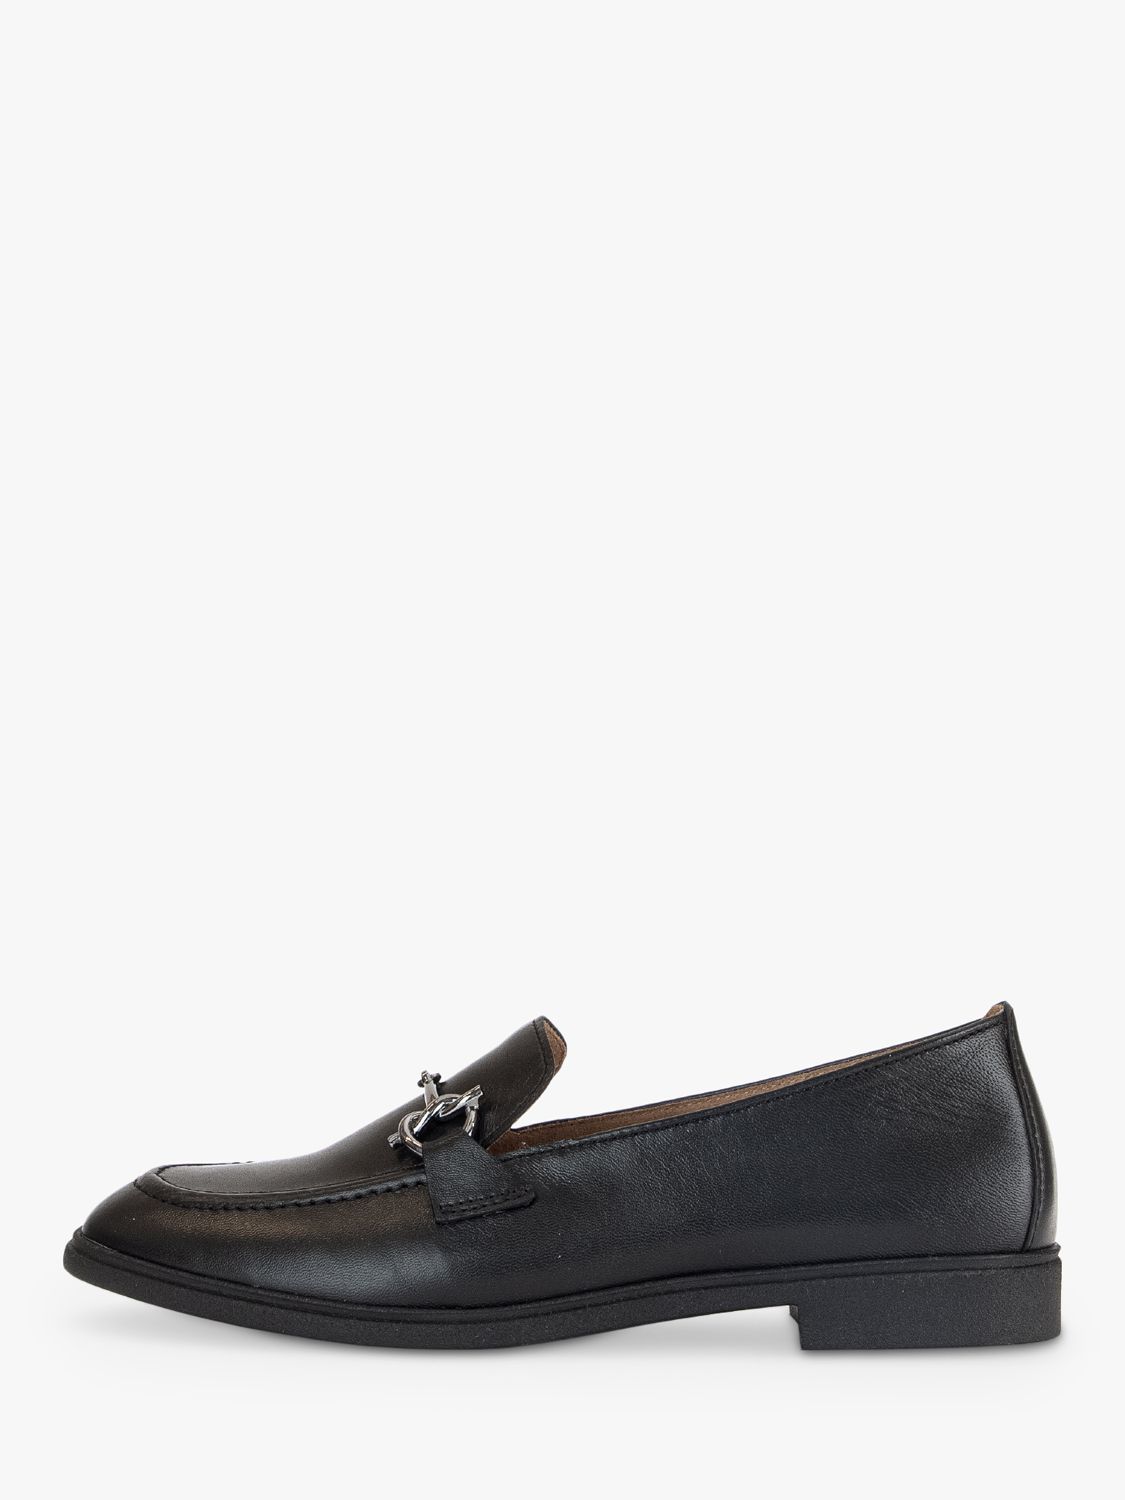 Gabor Beaumont Leather Loafers, Black at John Lewis & Partners